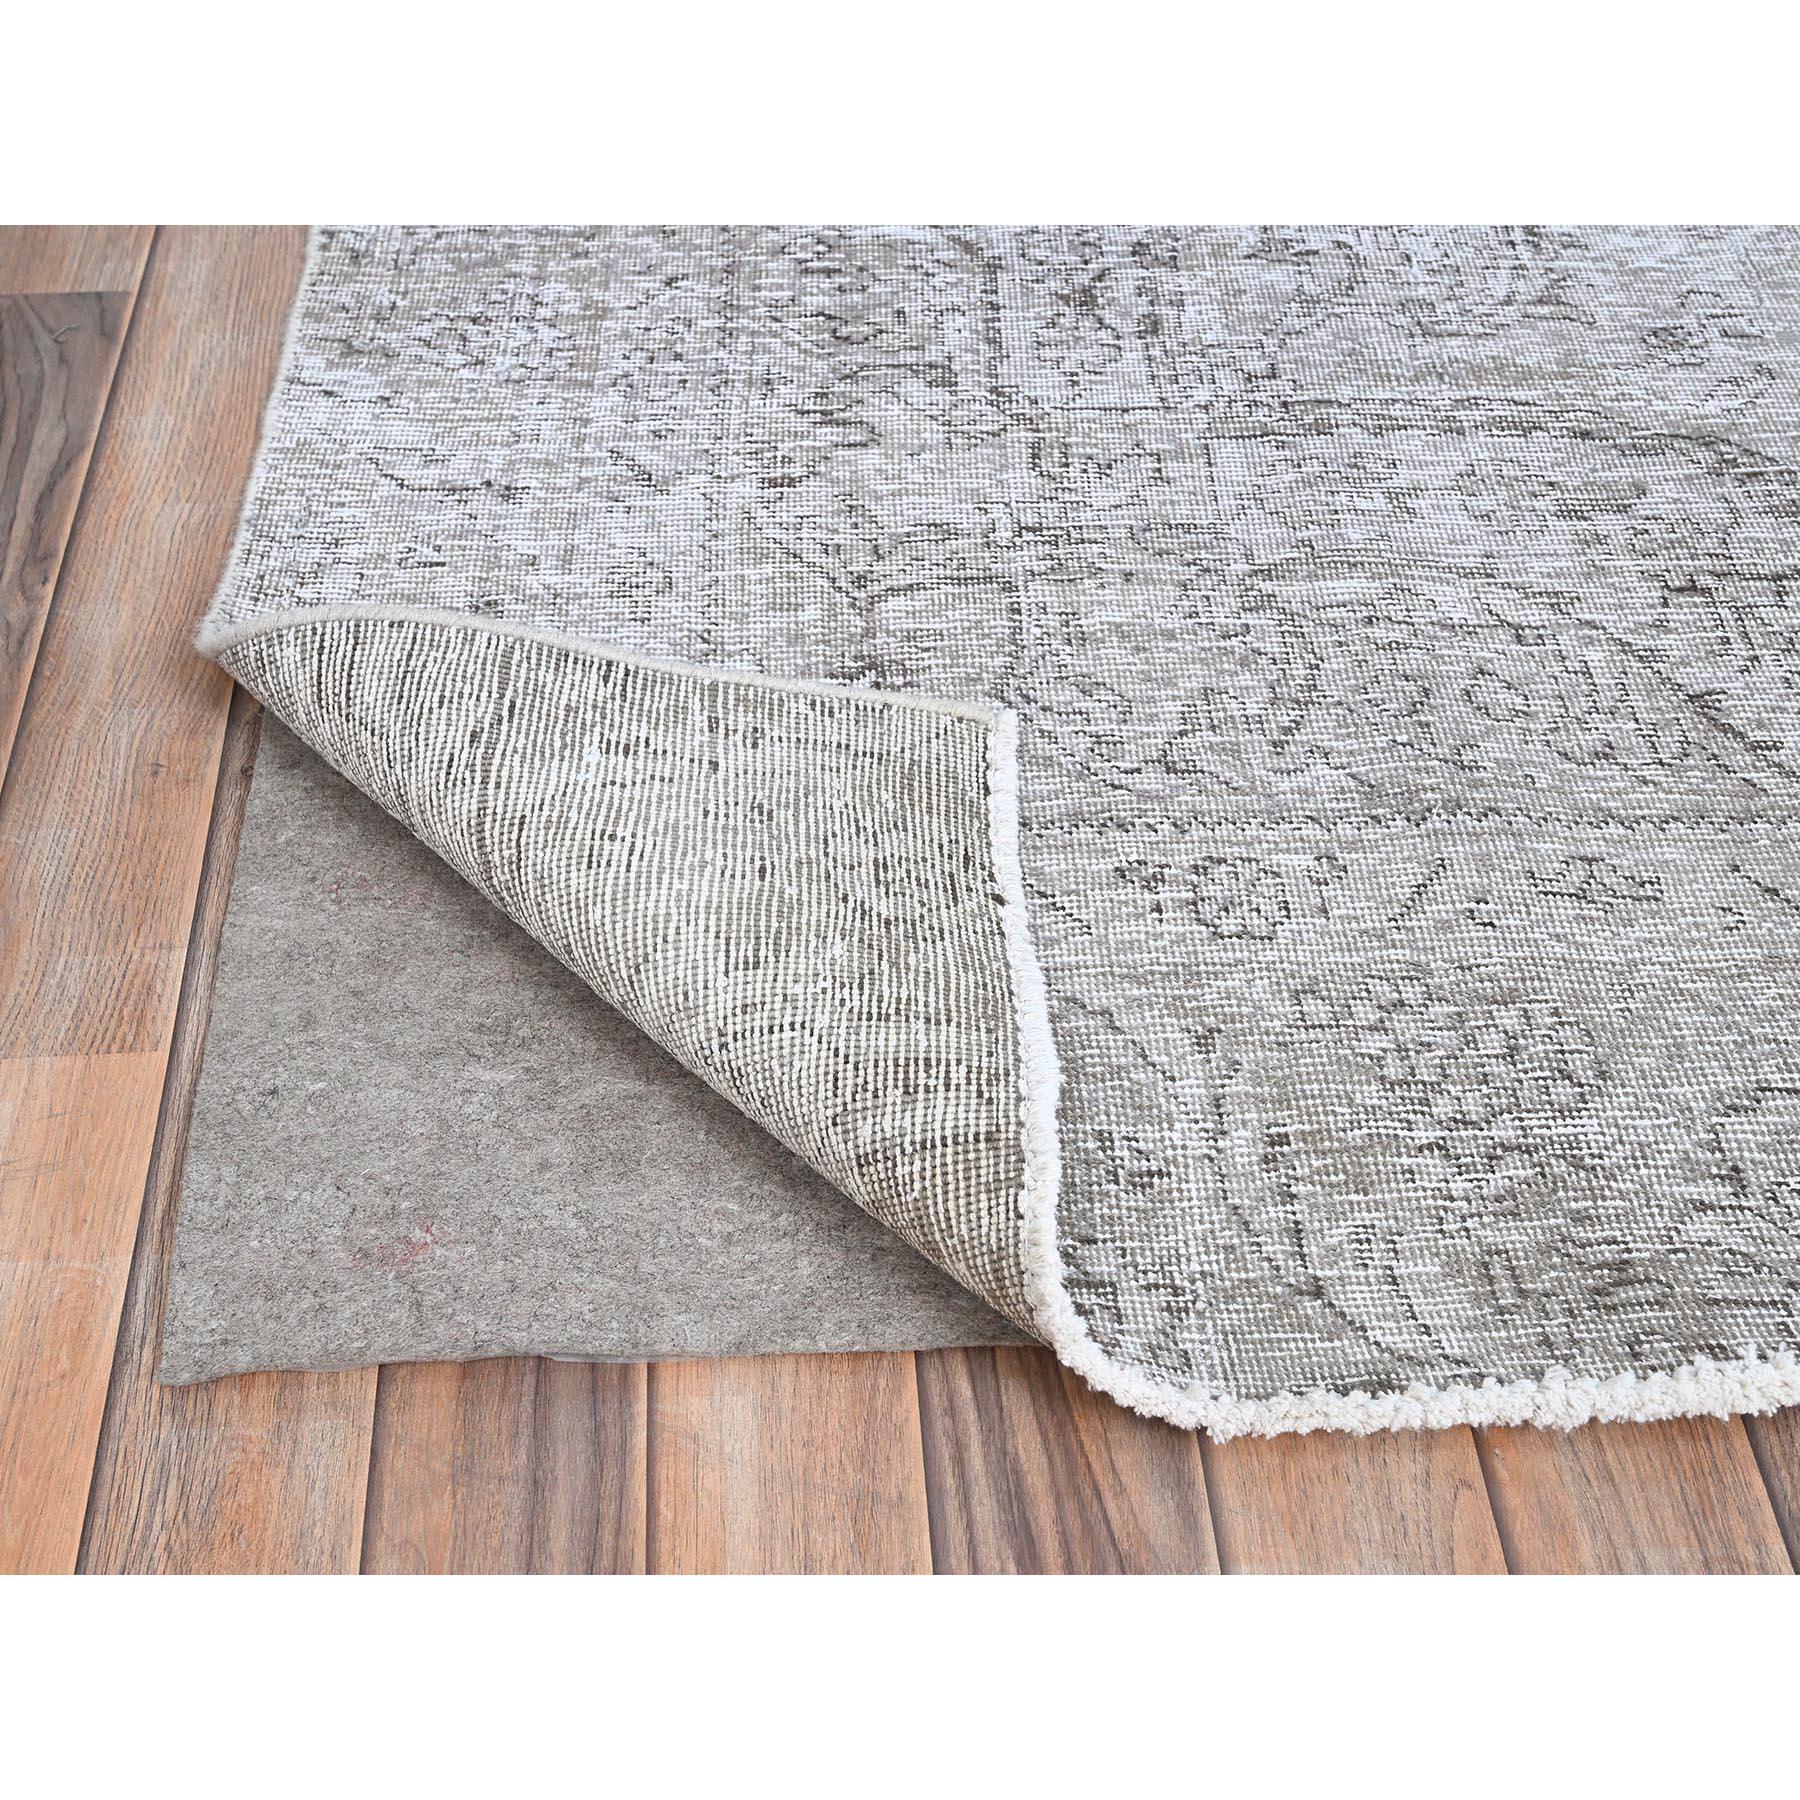 Mid-20th Century Gray Evenly Worn Old Persian Tabriz White Wash Clean Hand Knotted Soft Wool Rug For Sale